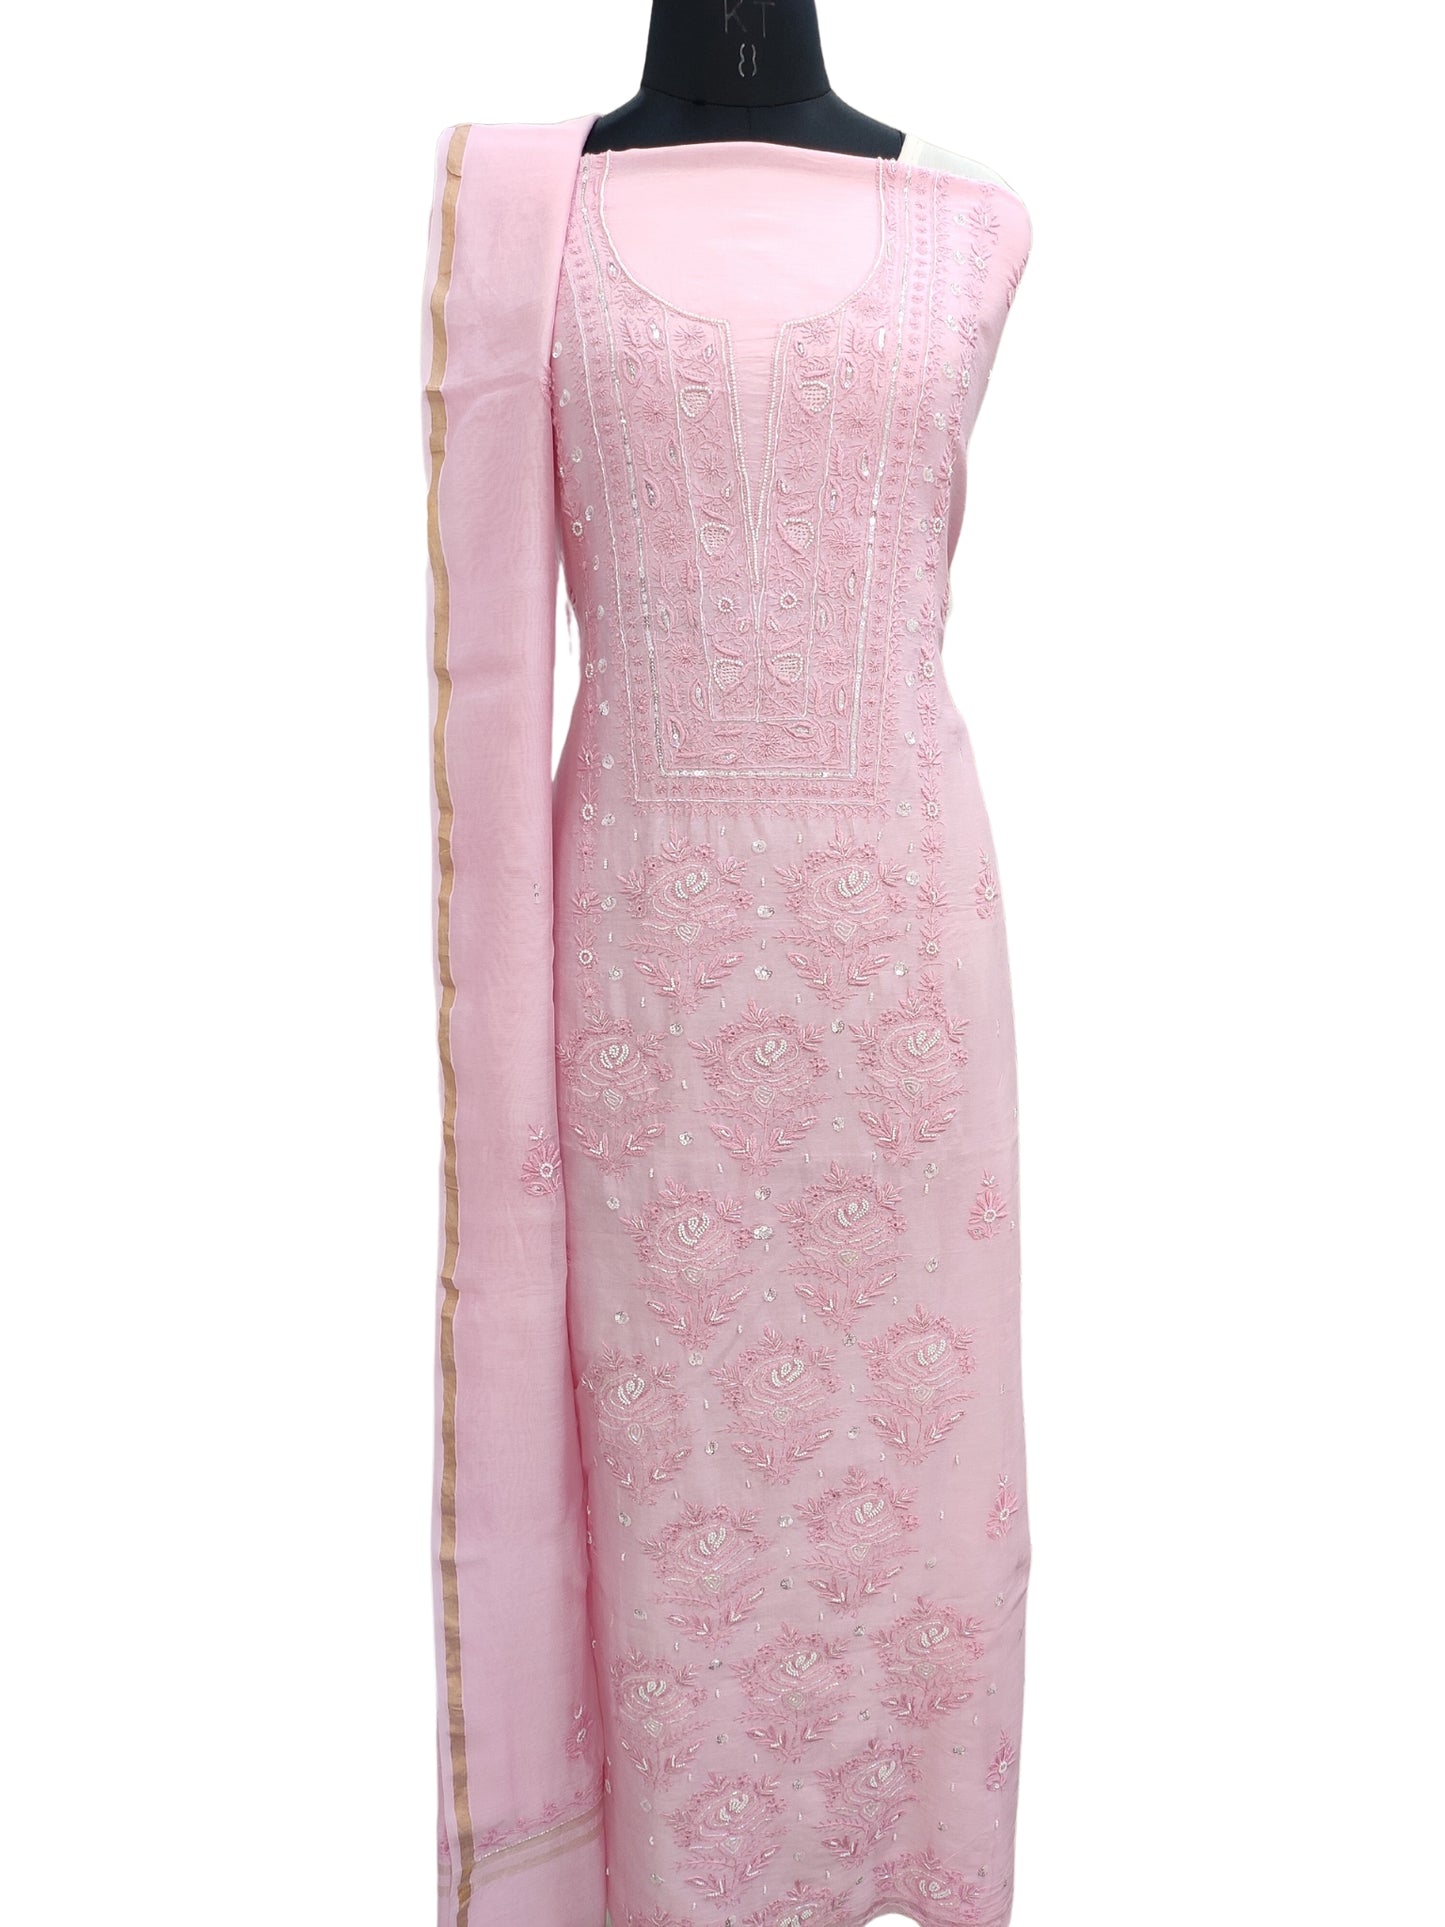 Shyamal Chikan Hand Embroidered Pink Chanderi Lucknowi Chikankari Unstitched Suit Piece with Pearl & Sequin Work (Set of 2) - S19390